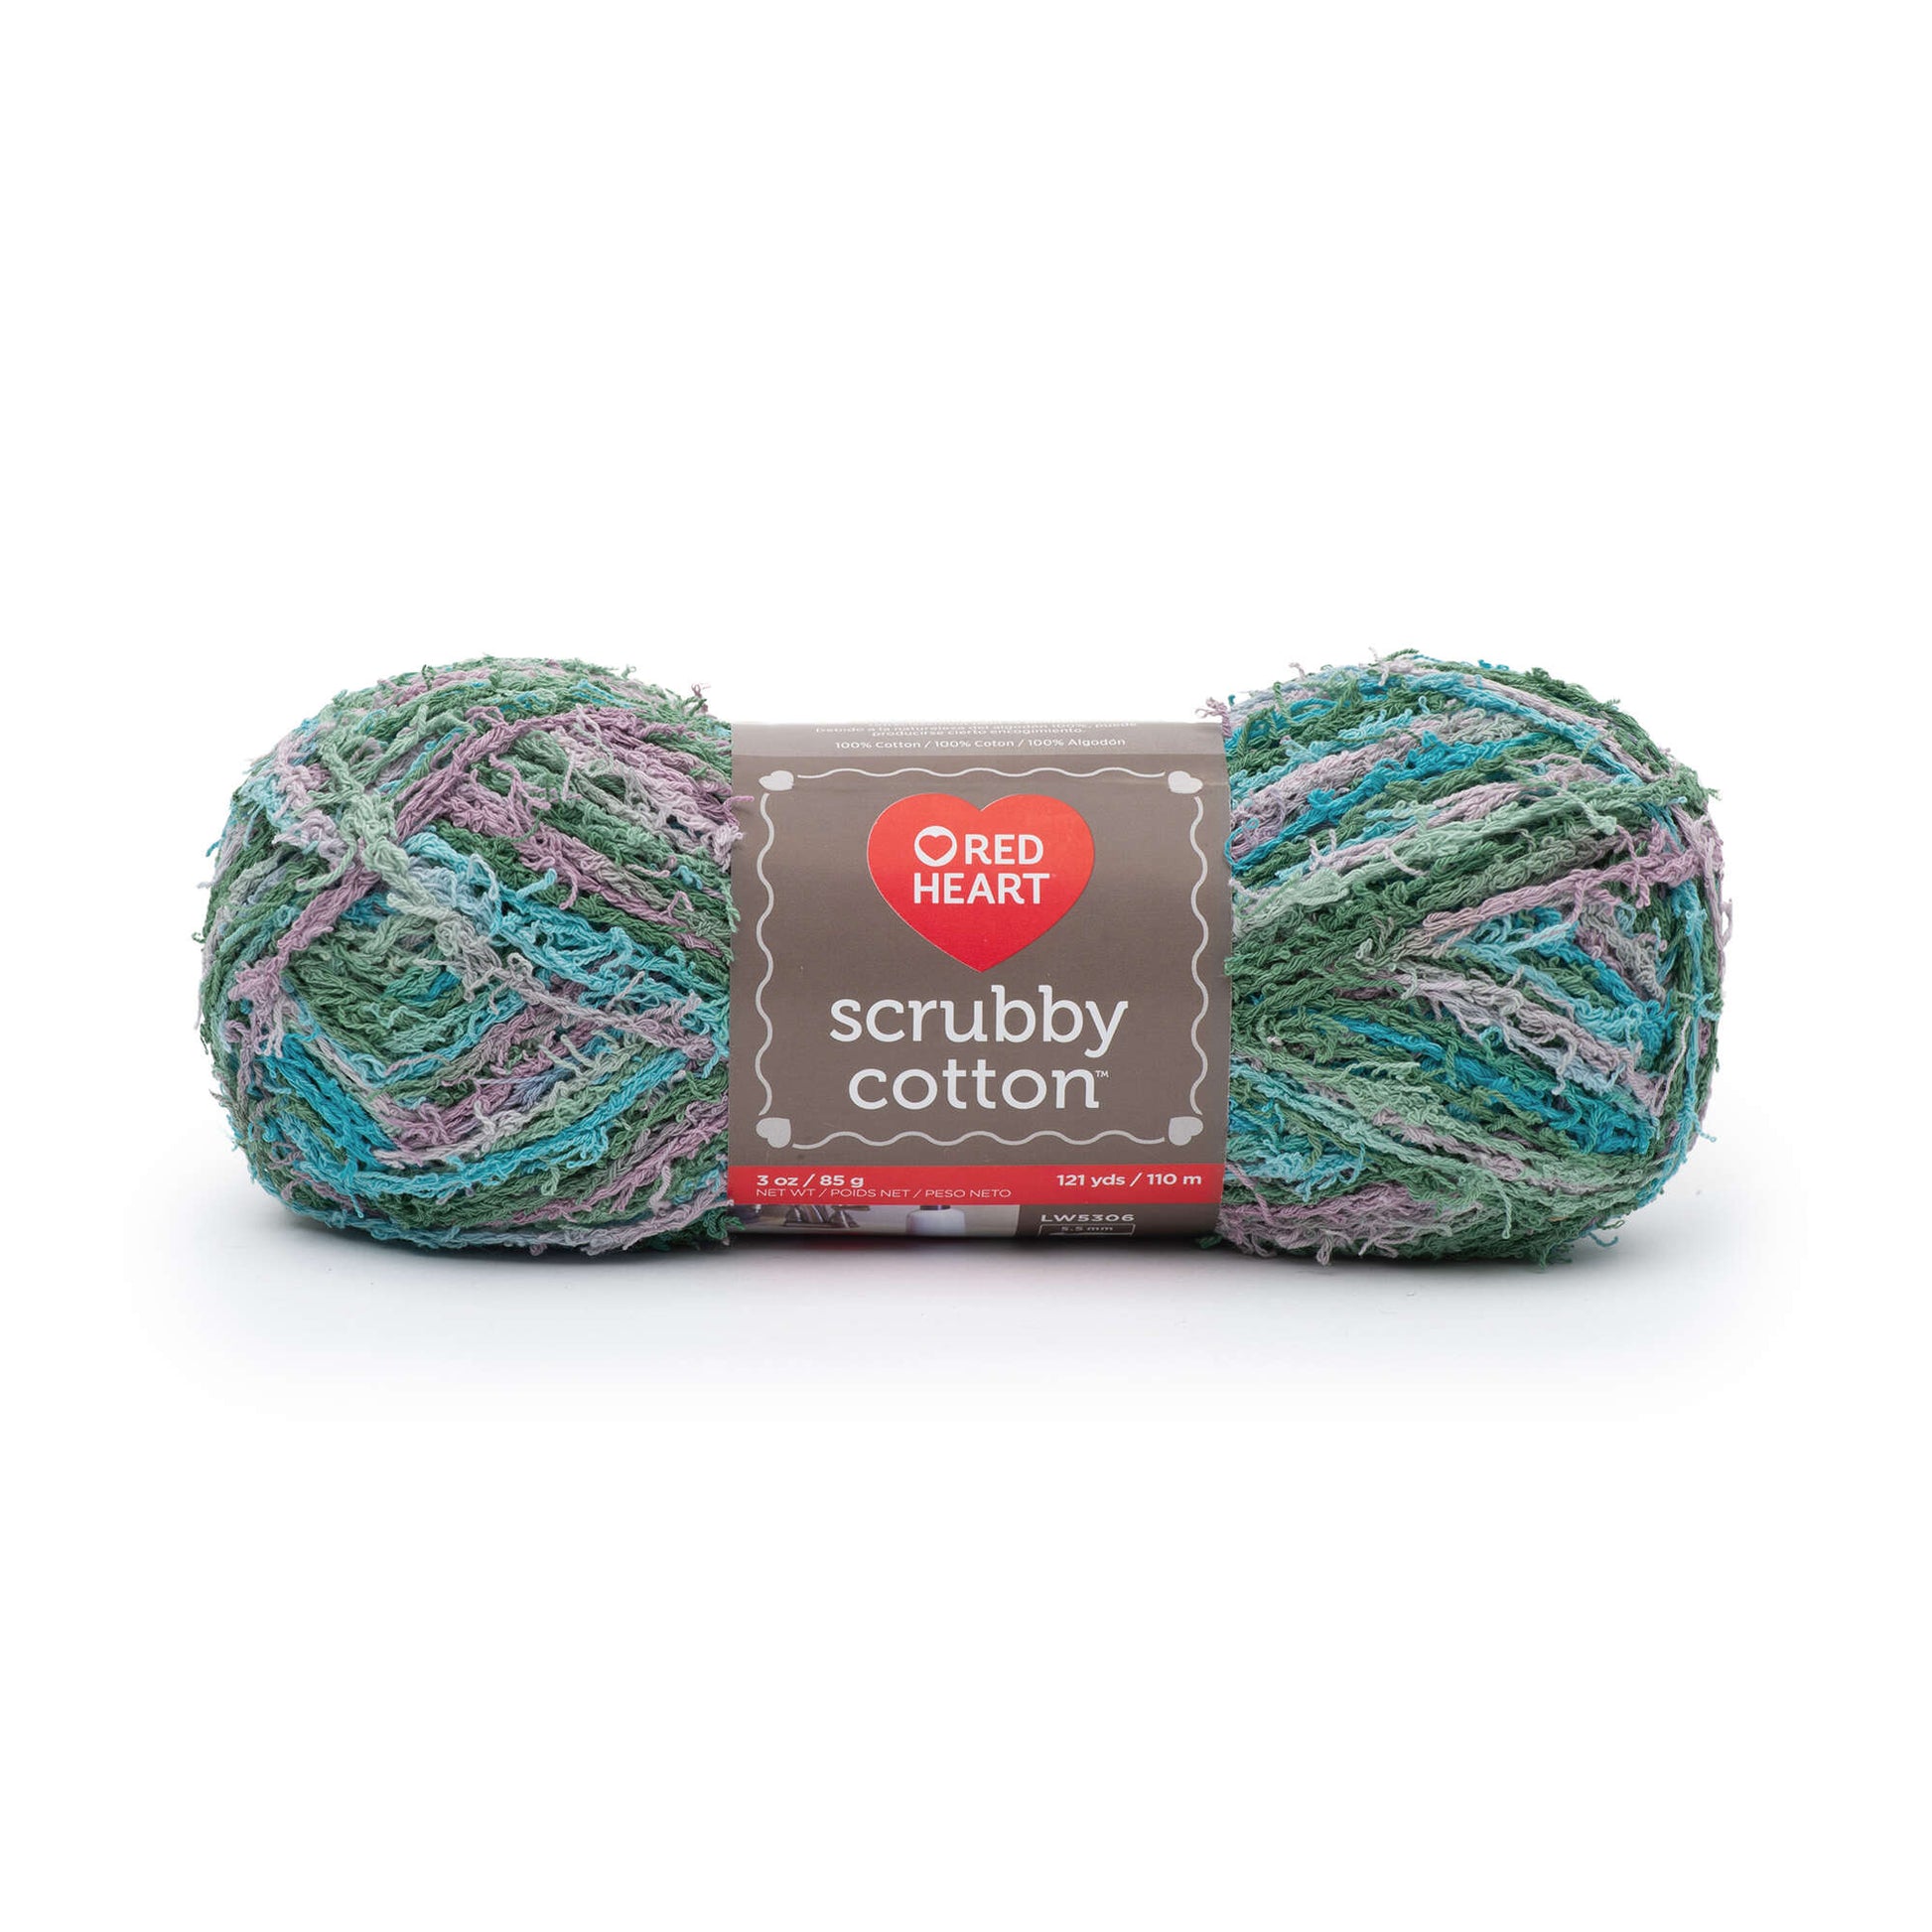 Red Heart Scrubby Cotton Yarn - Clearance shades Paradise Print